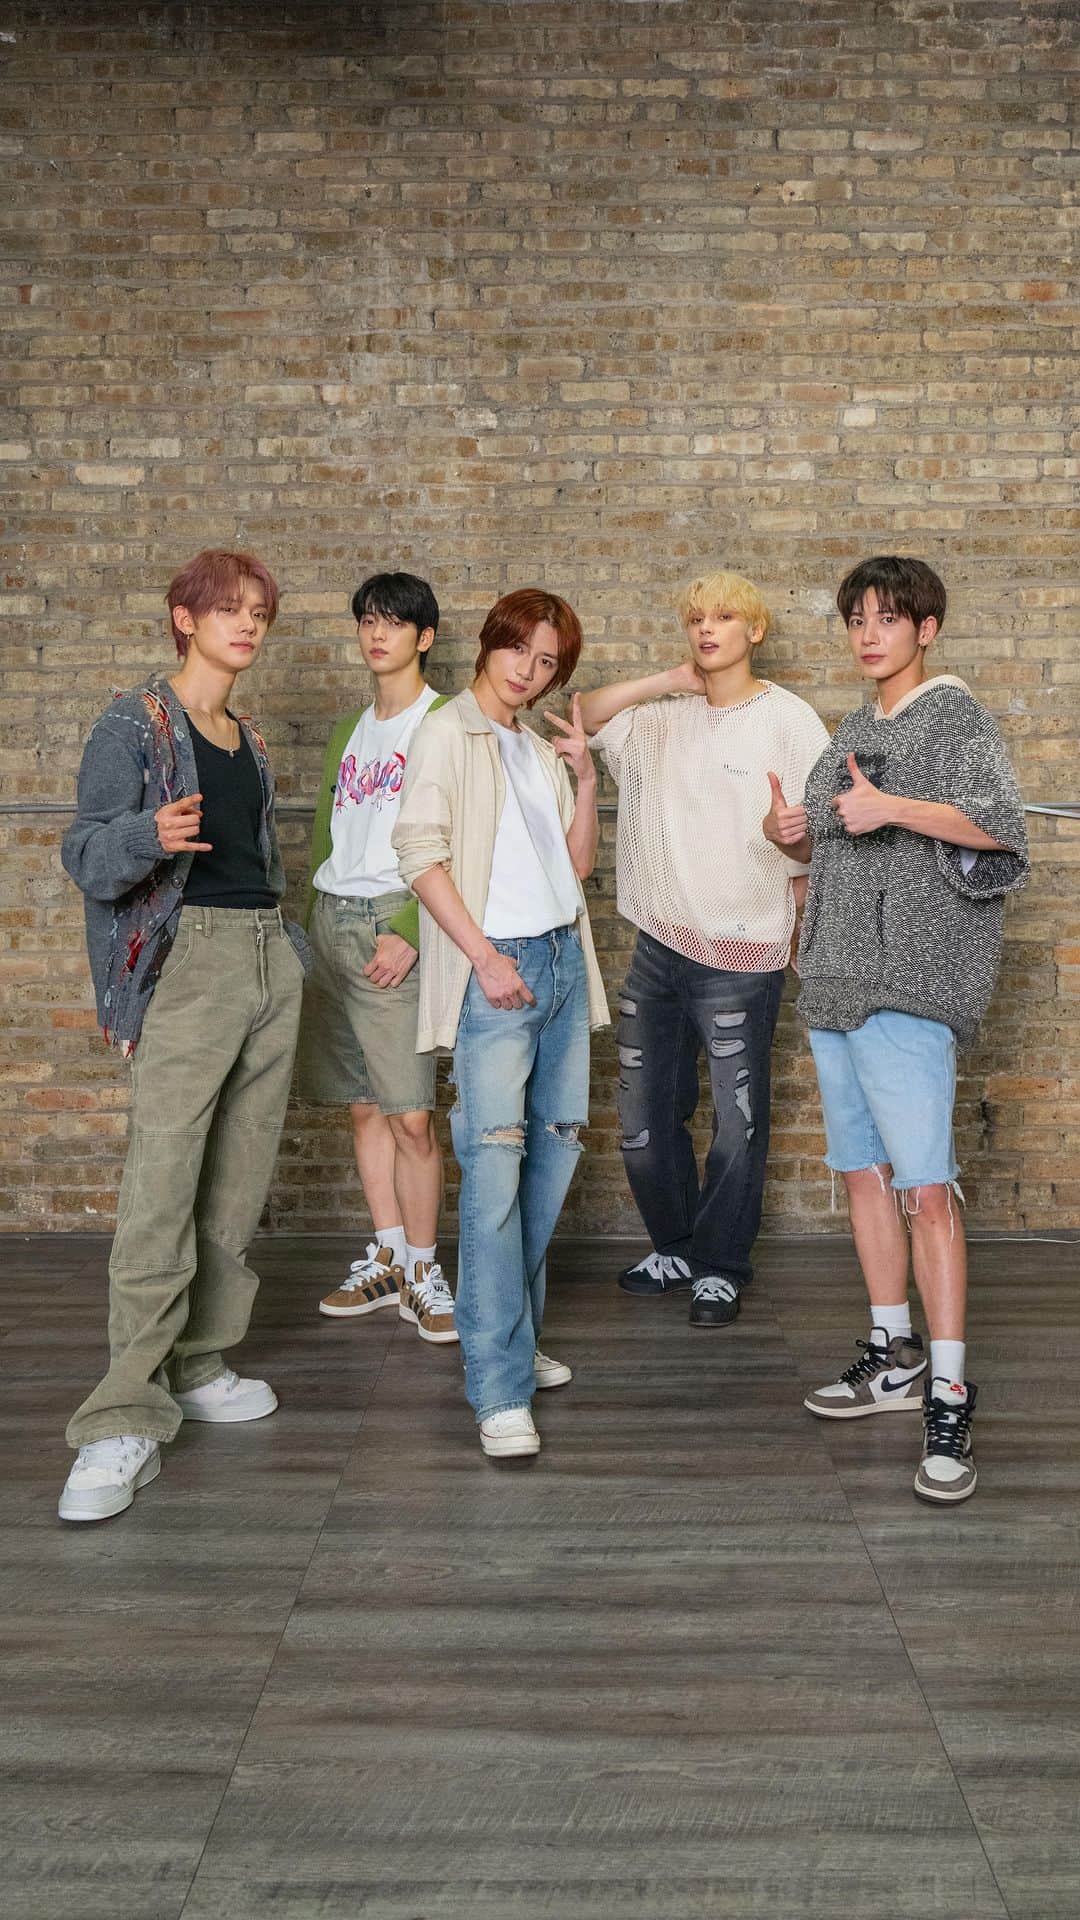 Instagramのインスタグラム：「What does it take to be a K-pop star? Ask South Korean group TOMORROW X TOGETHER (@txt_bighit).  Here’s what the five members — Soobin, Yeonjun, Beomgyu, Taehyun and Hueningkai — believe are the key components of K-pop artistry:  ✨ Self-expression 🔥 Countless rehearsal hours ✨ Epic choreography  Join TXT in rehearsals to see if you’ve got what it takes to be a K-pop artist, and check out their new track “Back for More (with Anitta)”.」